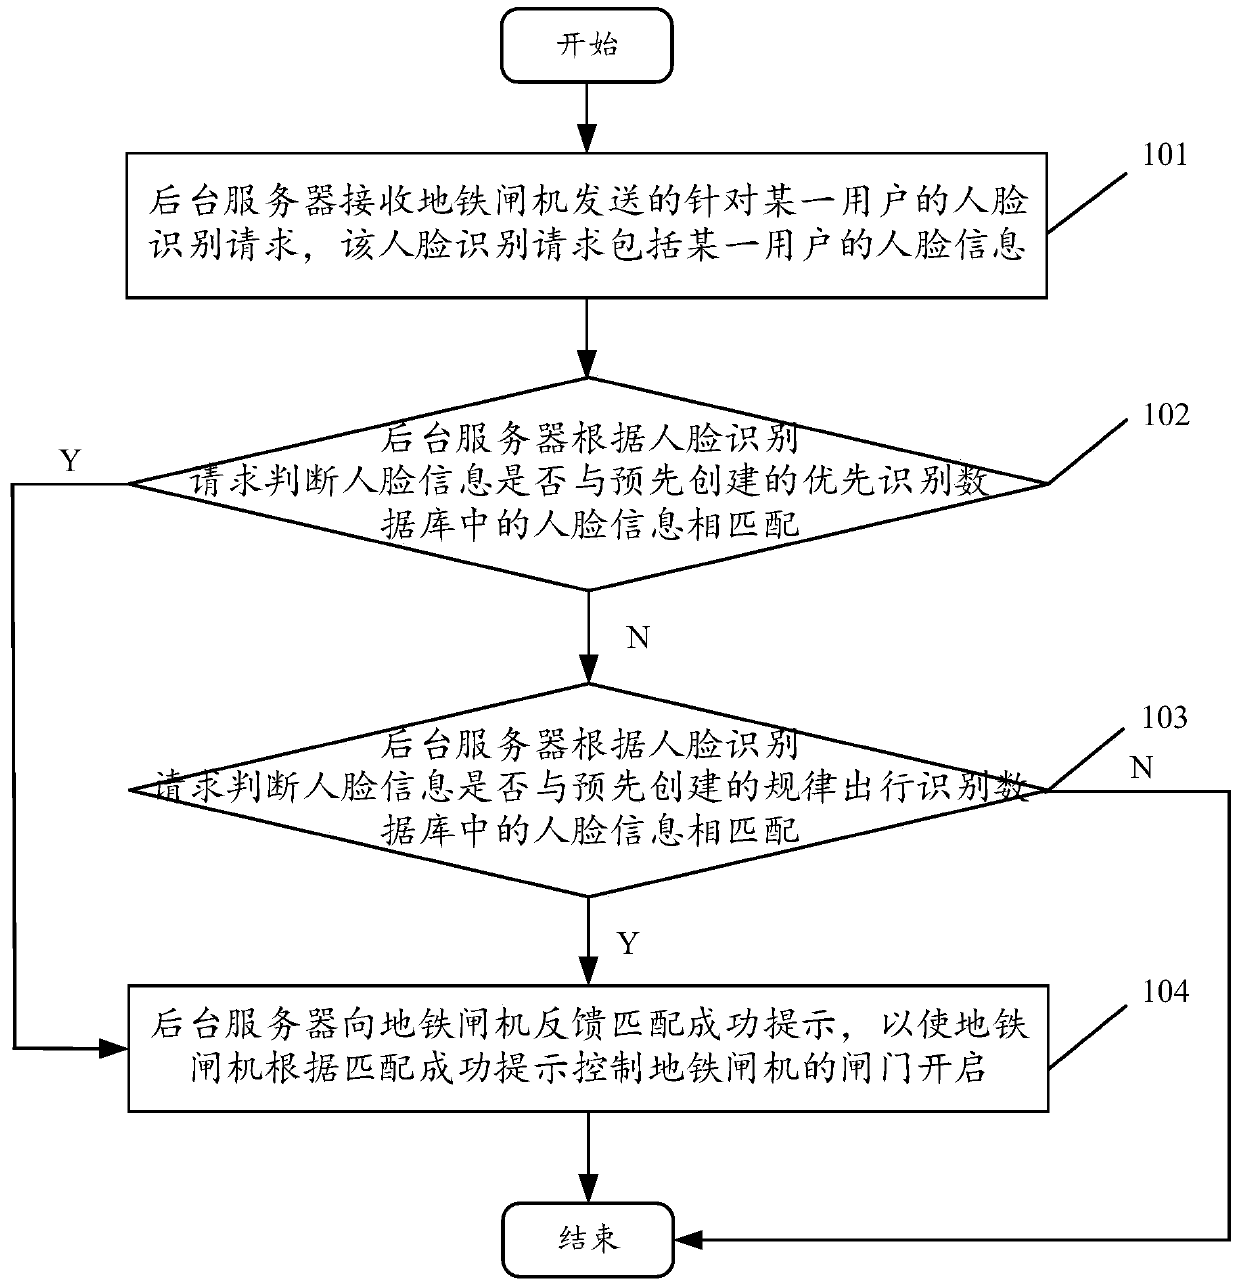 Control method and device based on subway face-scanning authentication